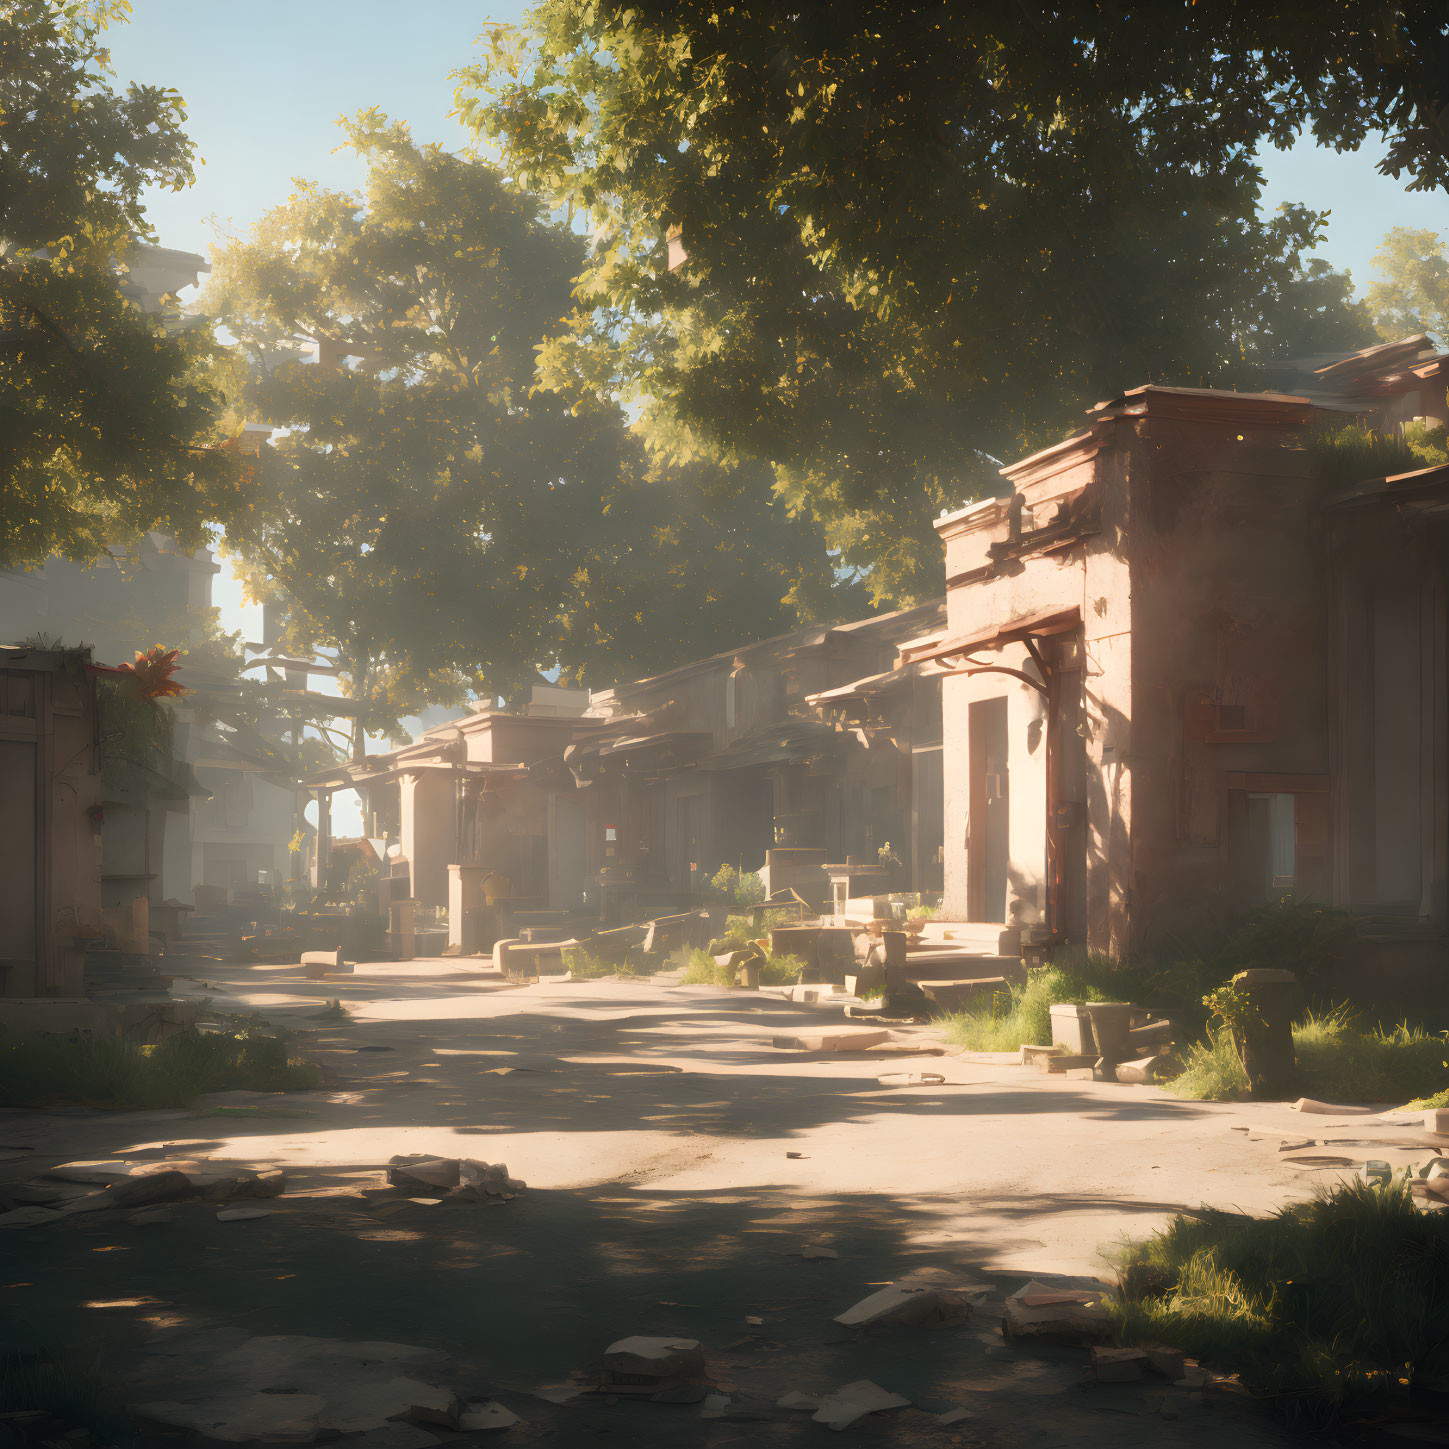 Sunlit street with overgrown plants and abandoned buildings in a serene, post-apocalyptic setting